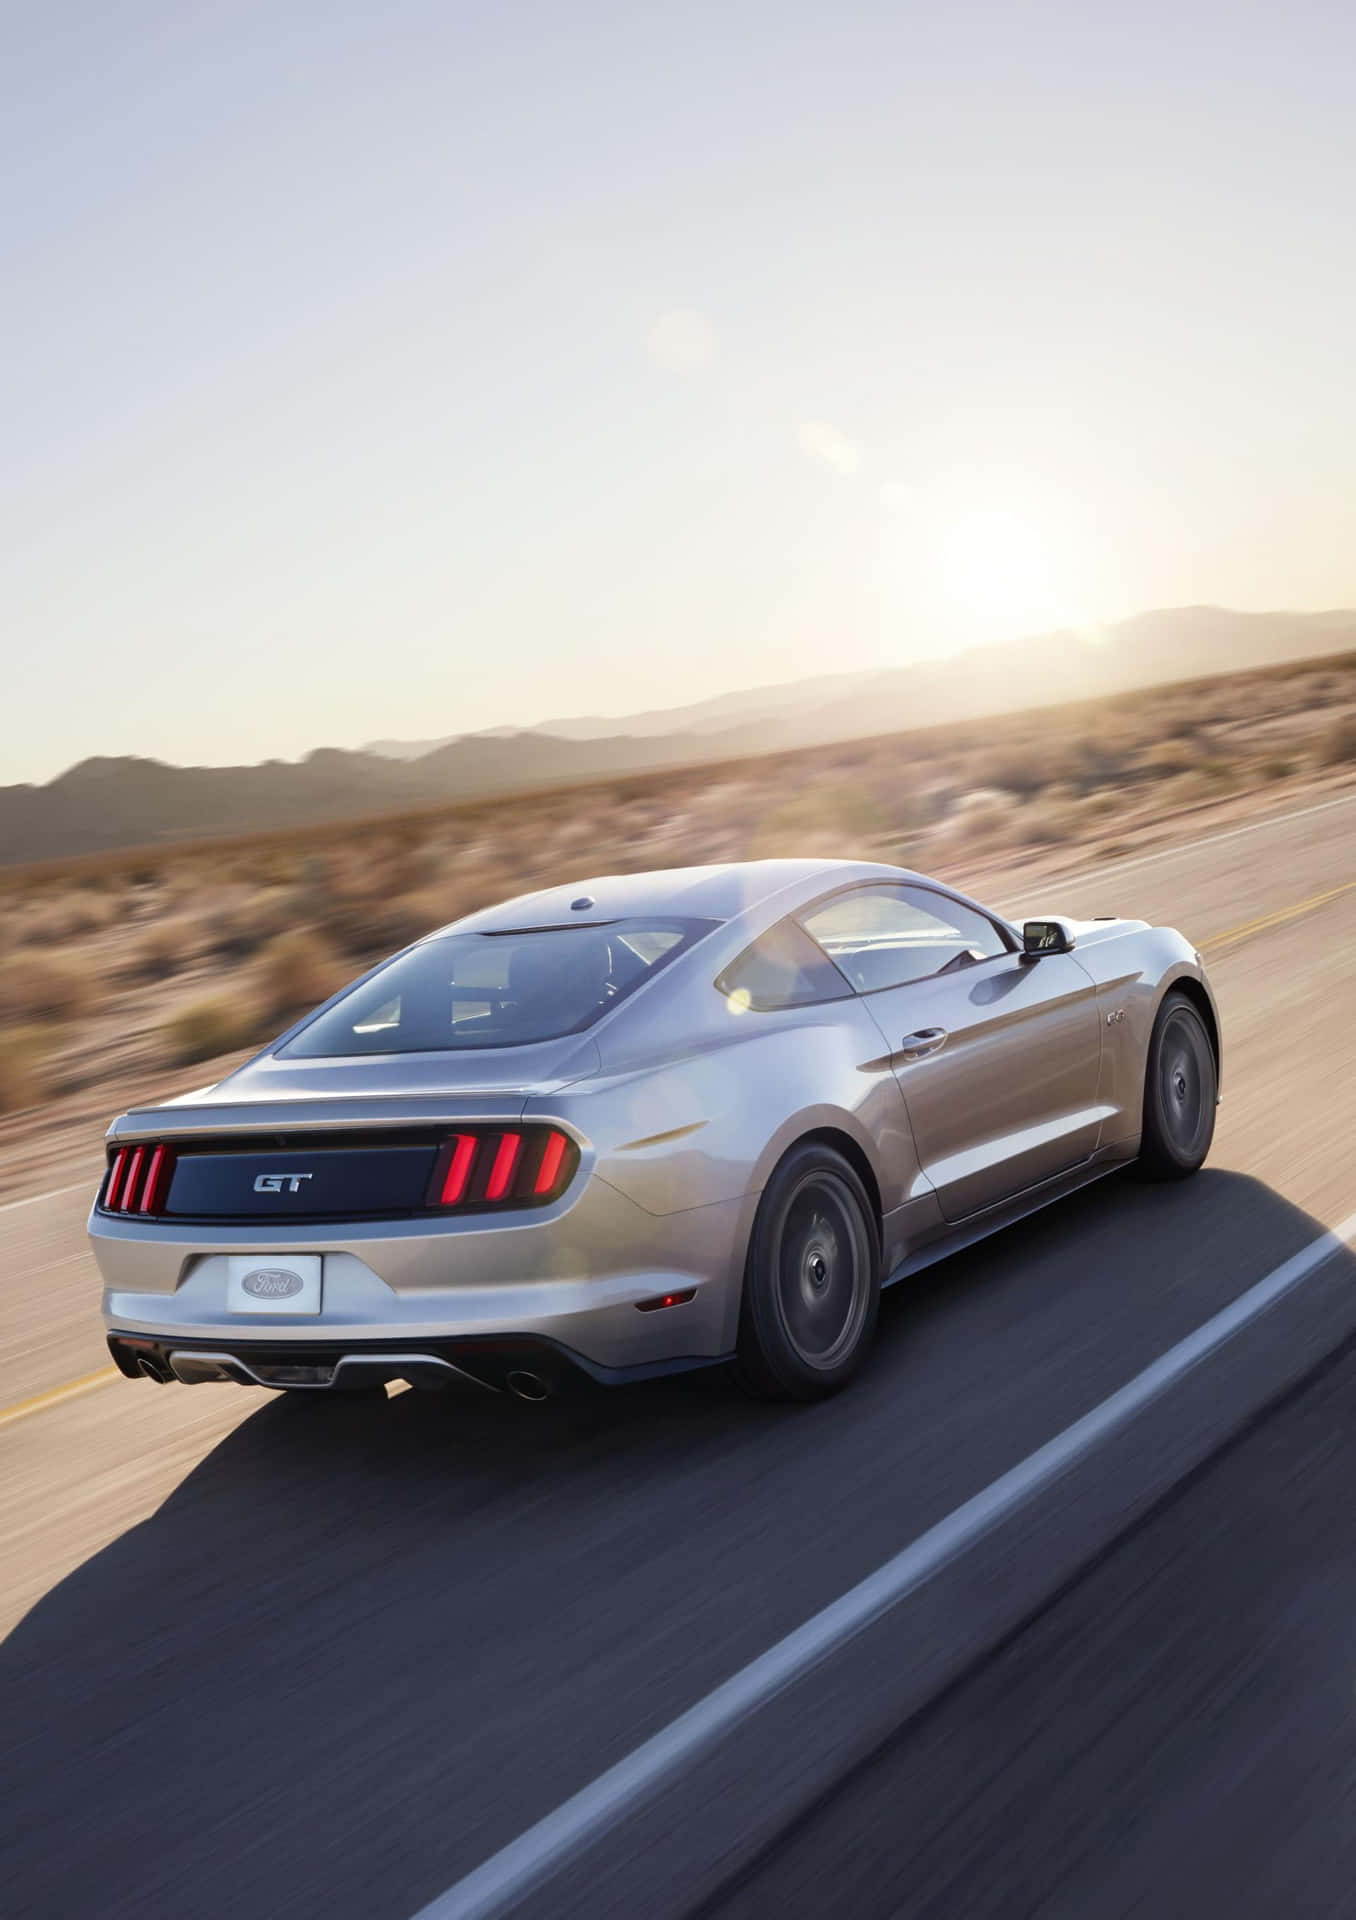 Caption: Red Ford Mustang California Special in Scenic Mountain Setting Wallpaper